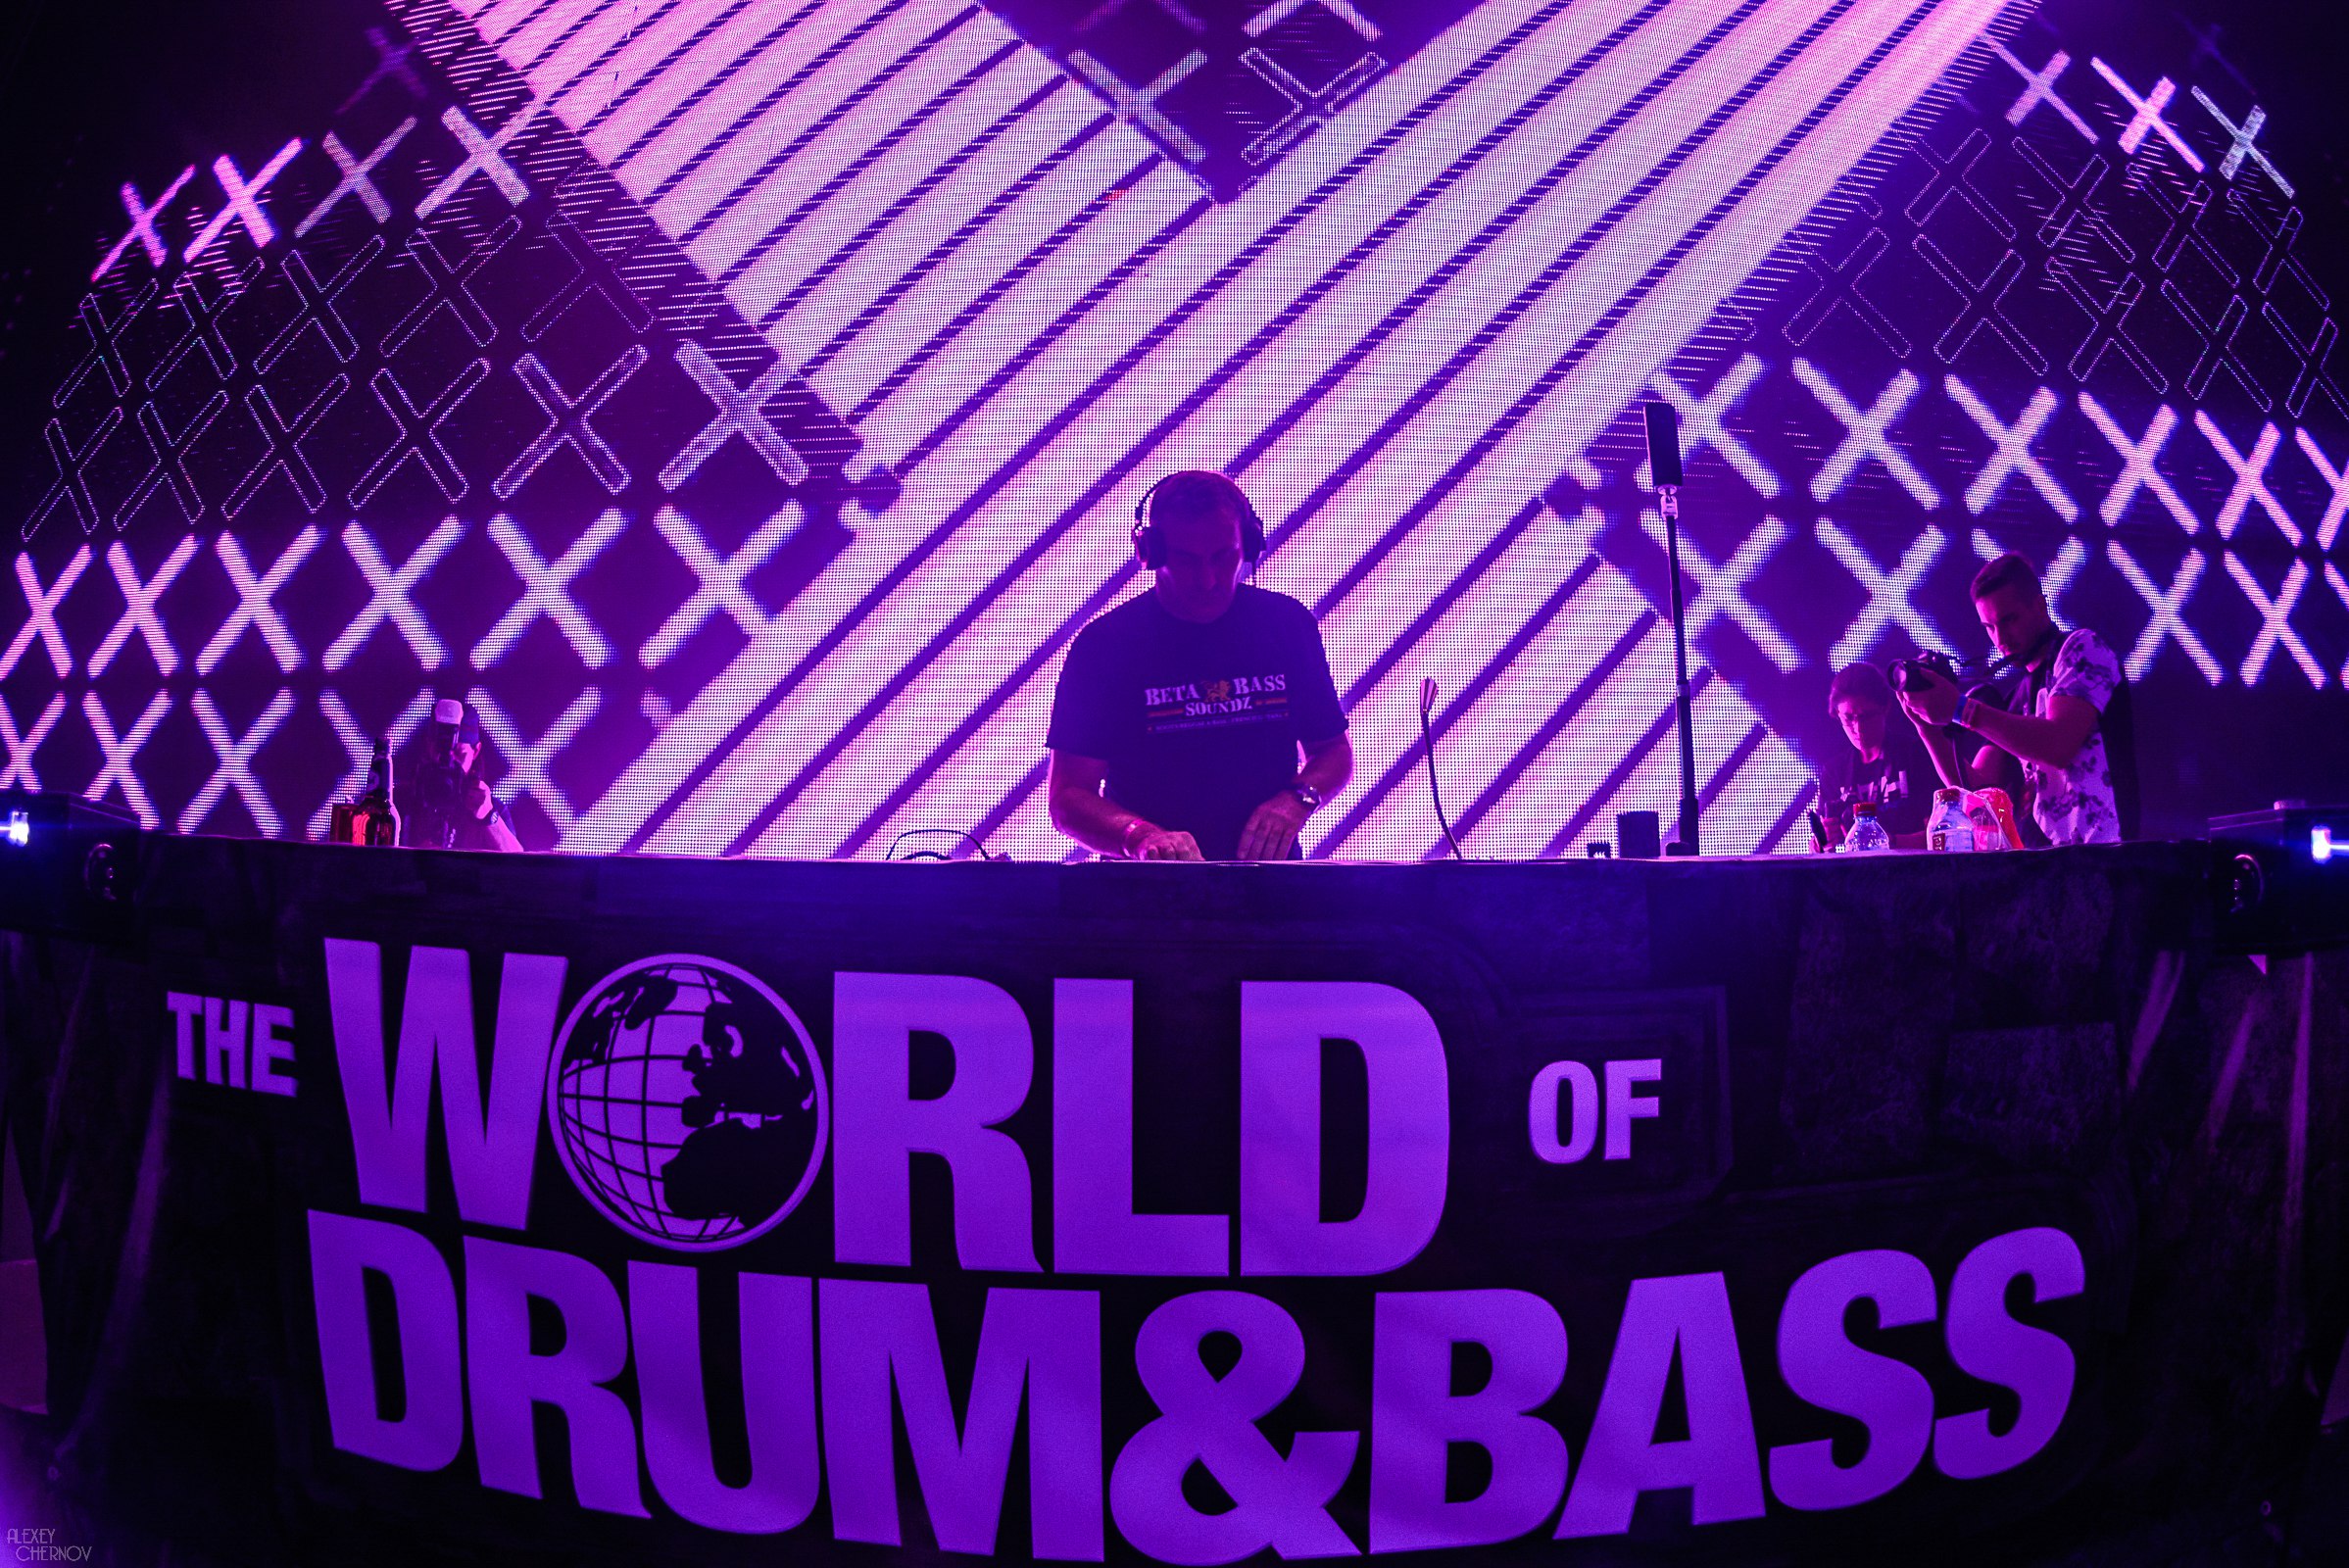 Drum and bass лучшее. Drum and Bass. Subwave Drum Bass. Drum and Bass картинки. Drum and Bass логотип.